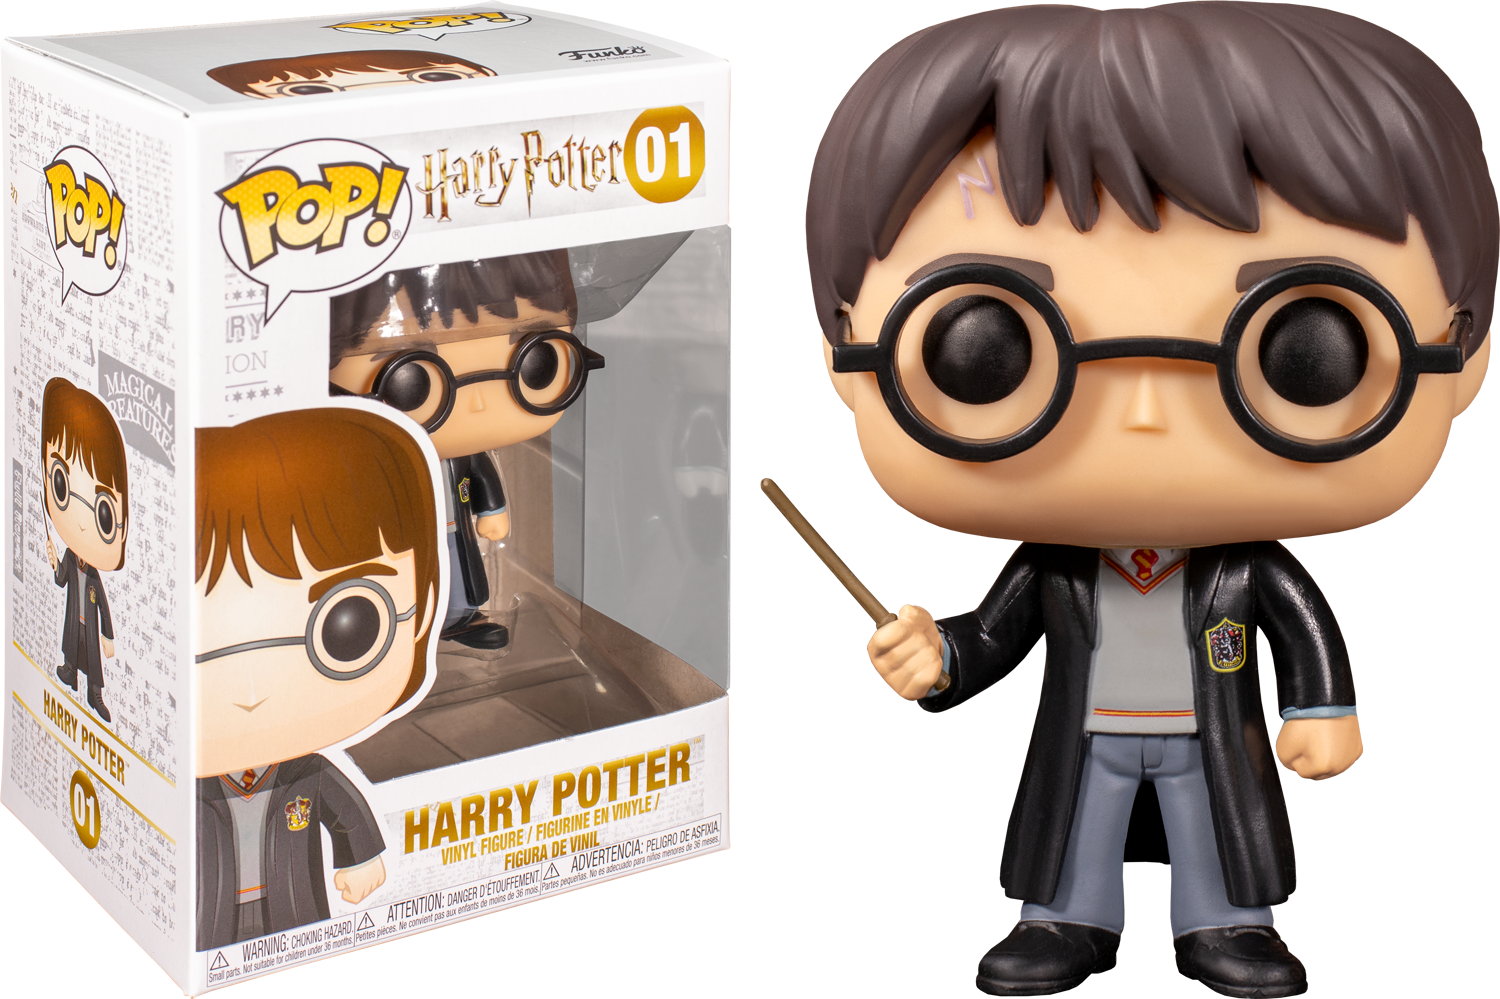 Funko Pop Harry Potter #118 - Harry Potter With Two Wands